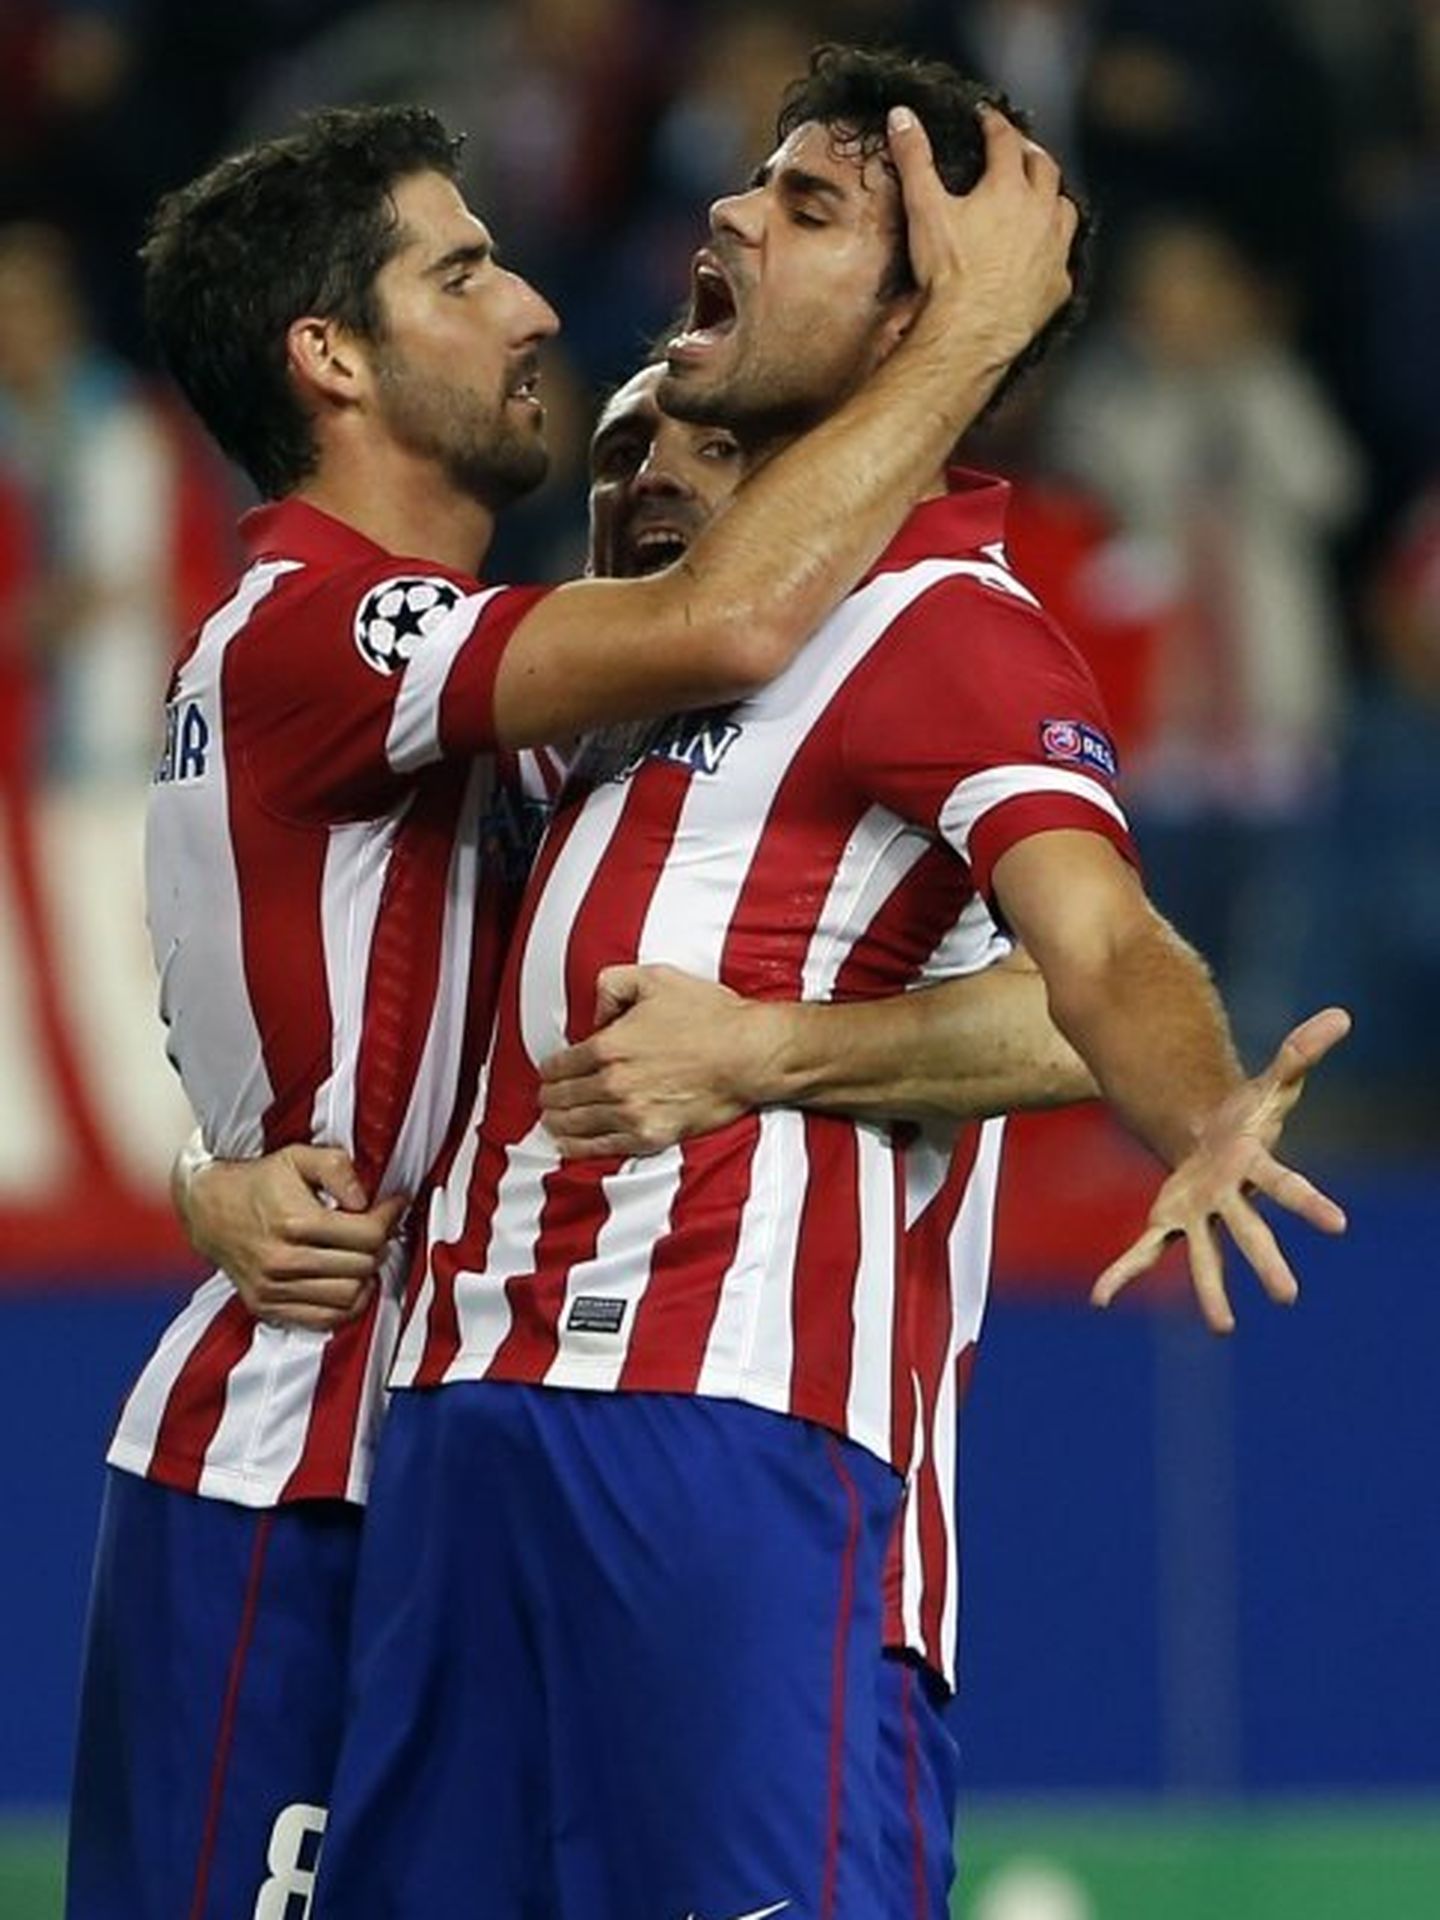 Atletico madrid's costa celebrates scoring against austria vienna with teammates garcia and 'juanfran' during their champions league group g soccer match at vicente calderon stadium in madrid